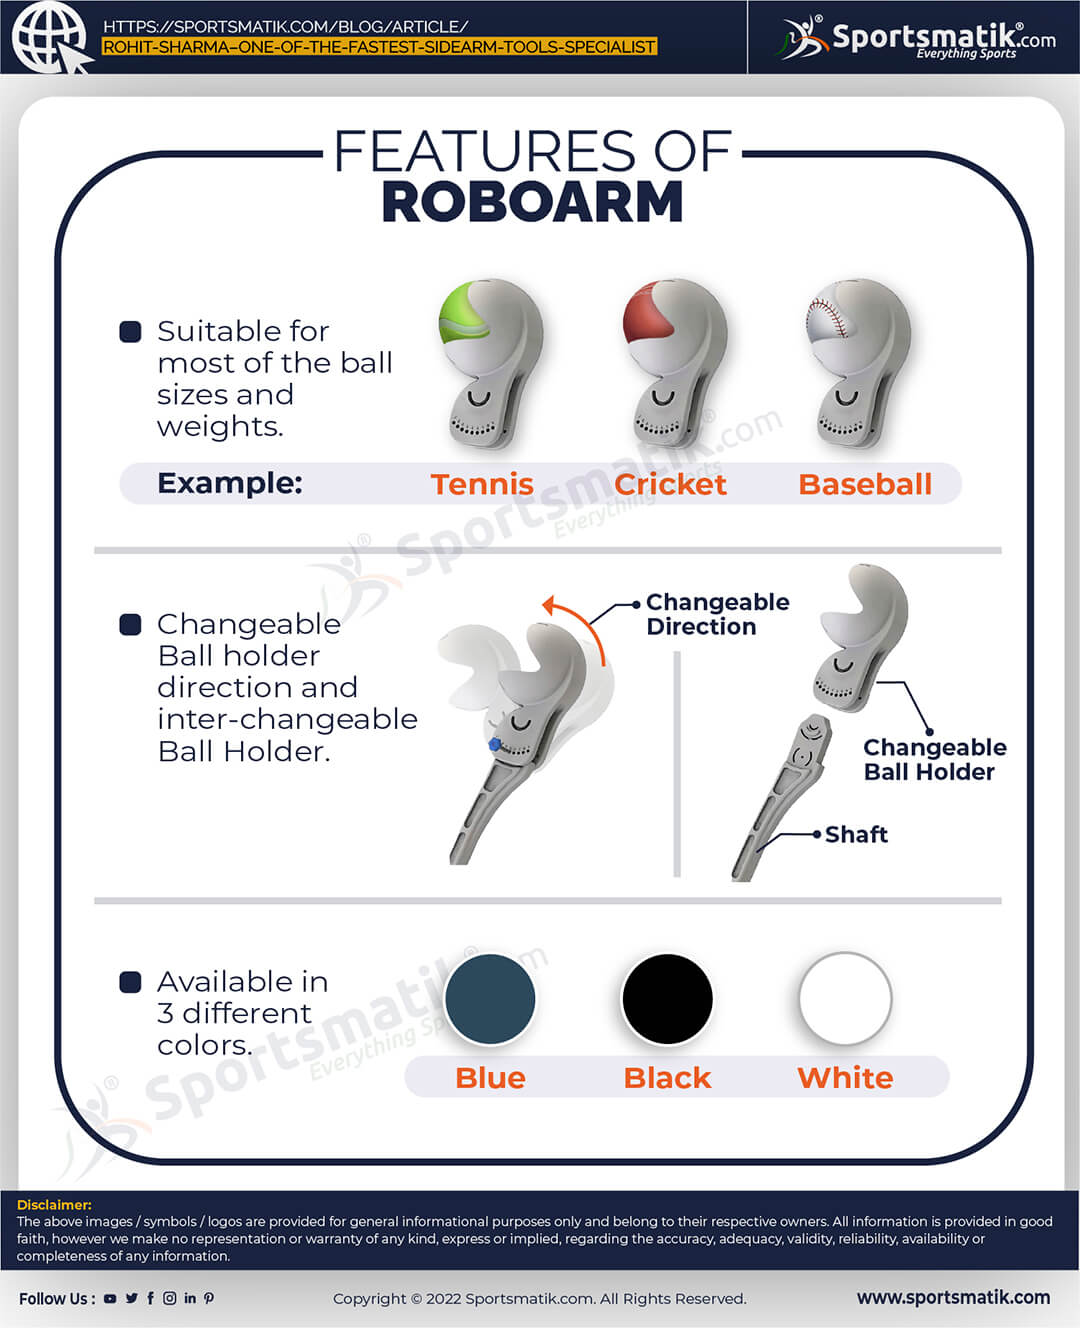 Features of Roboarm